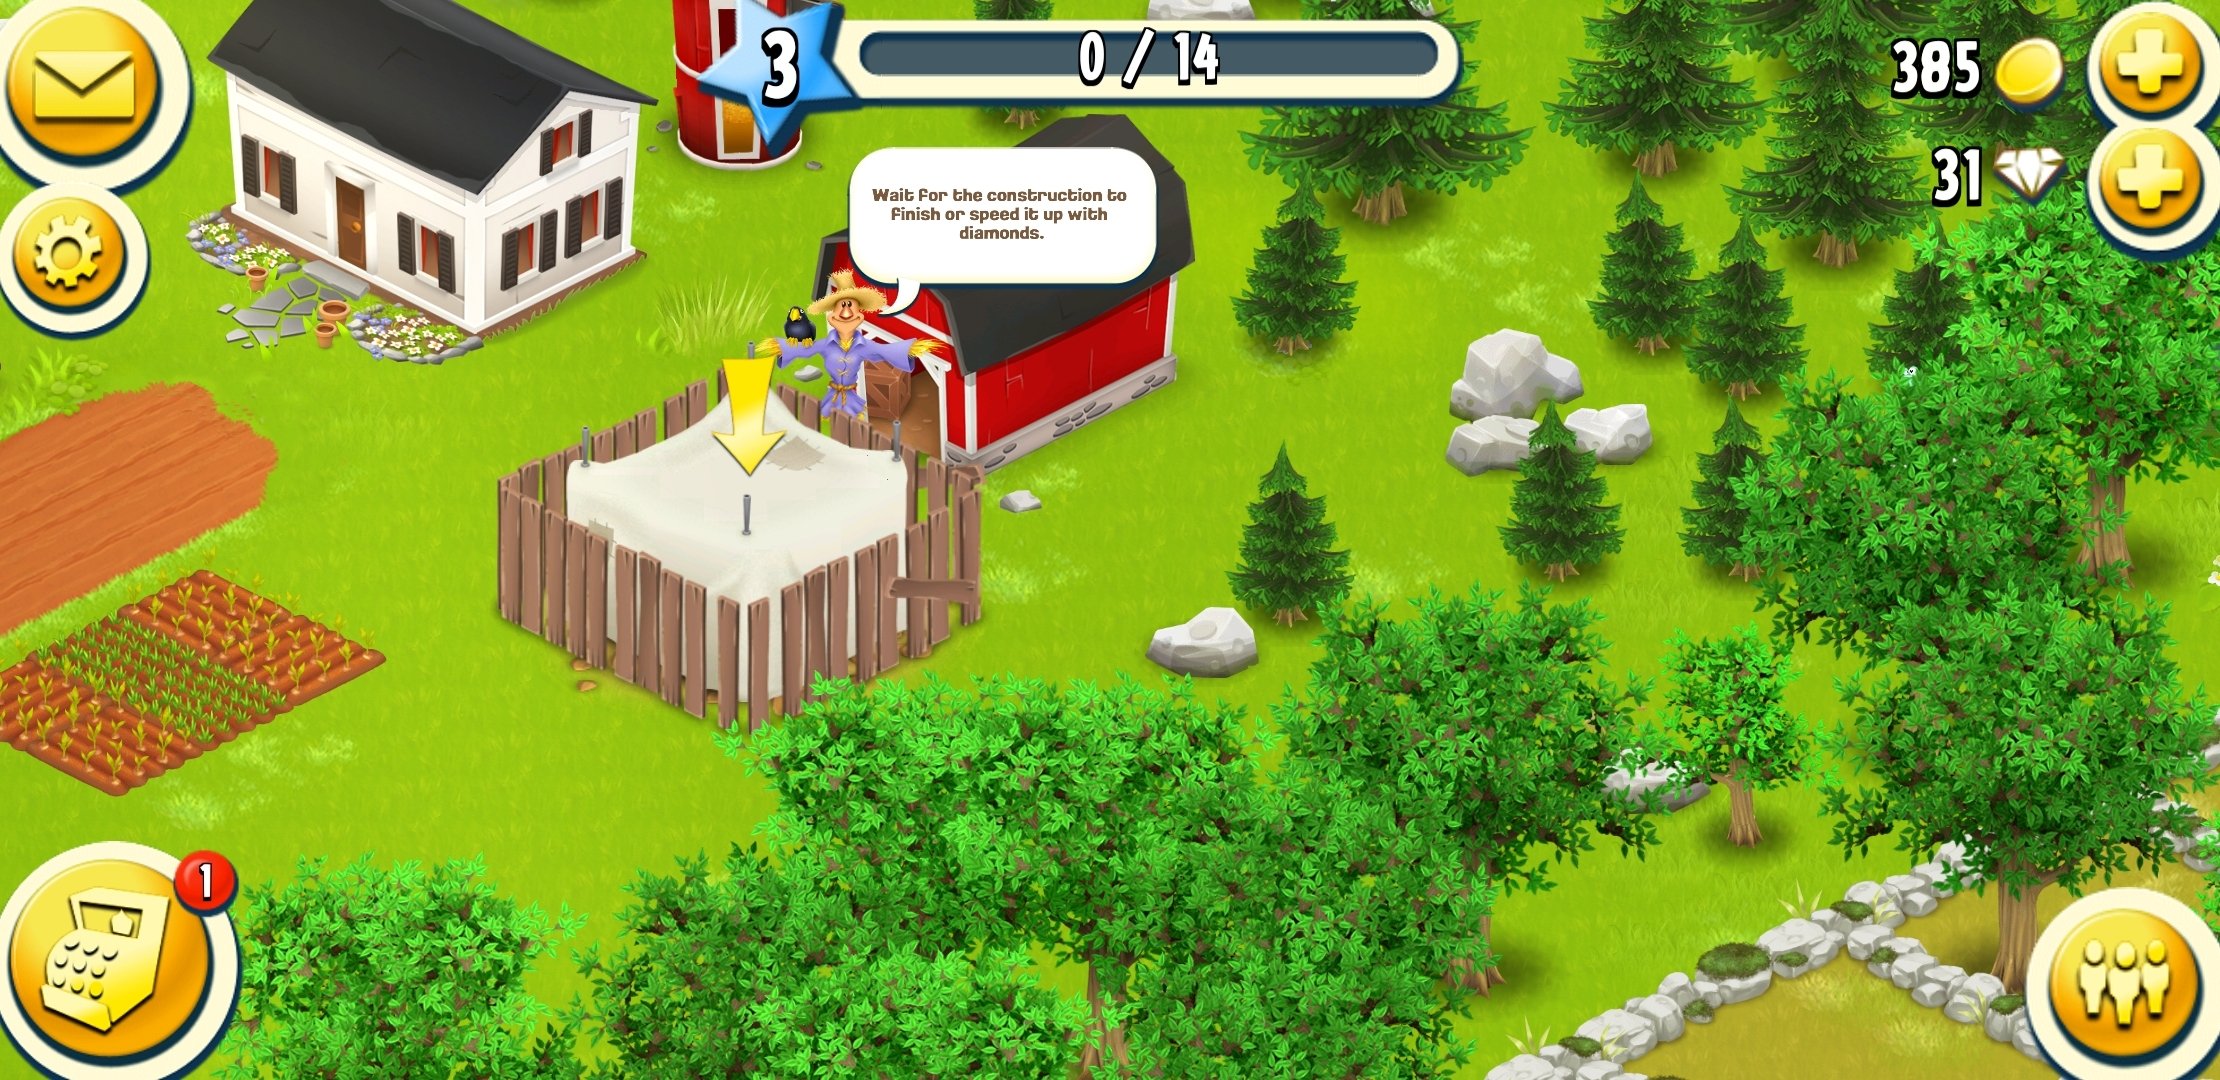 Download Hay Day On Mac